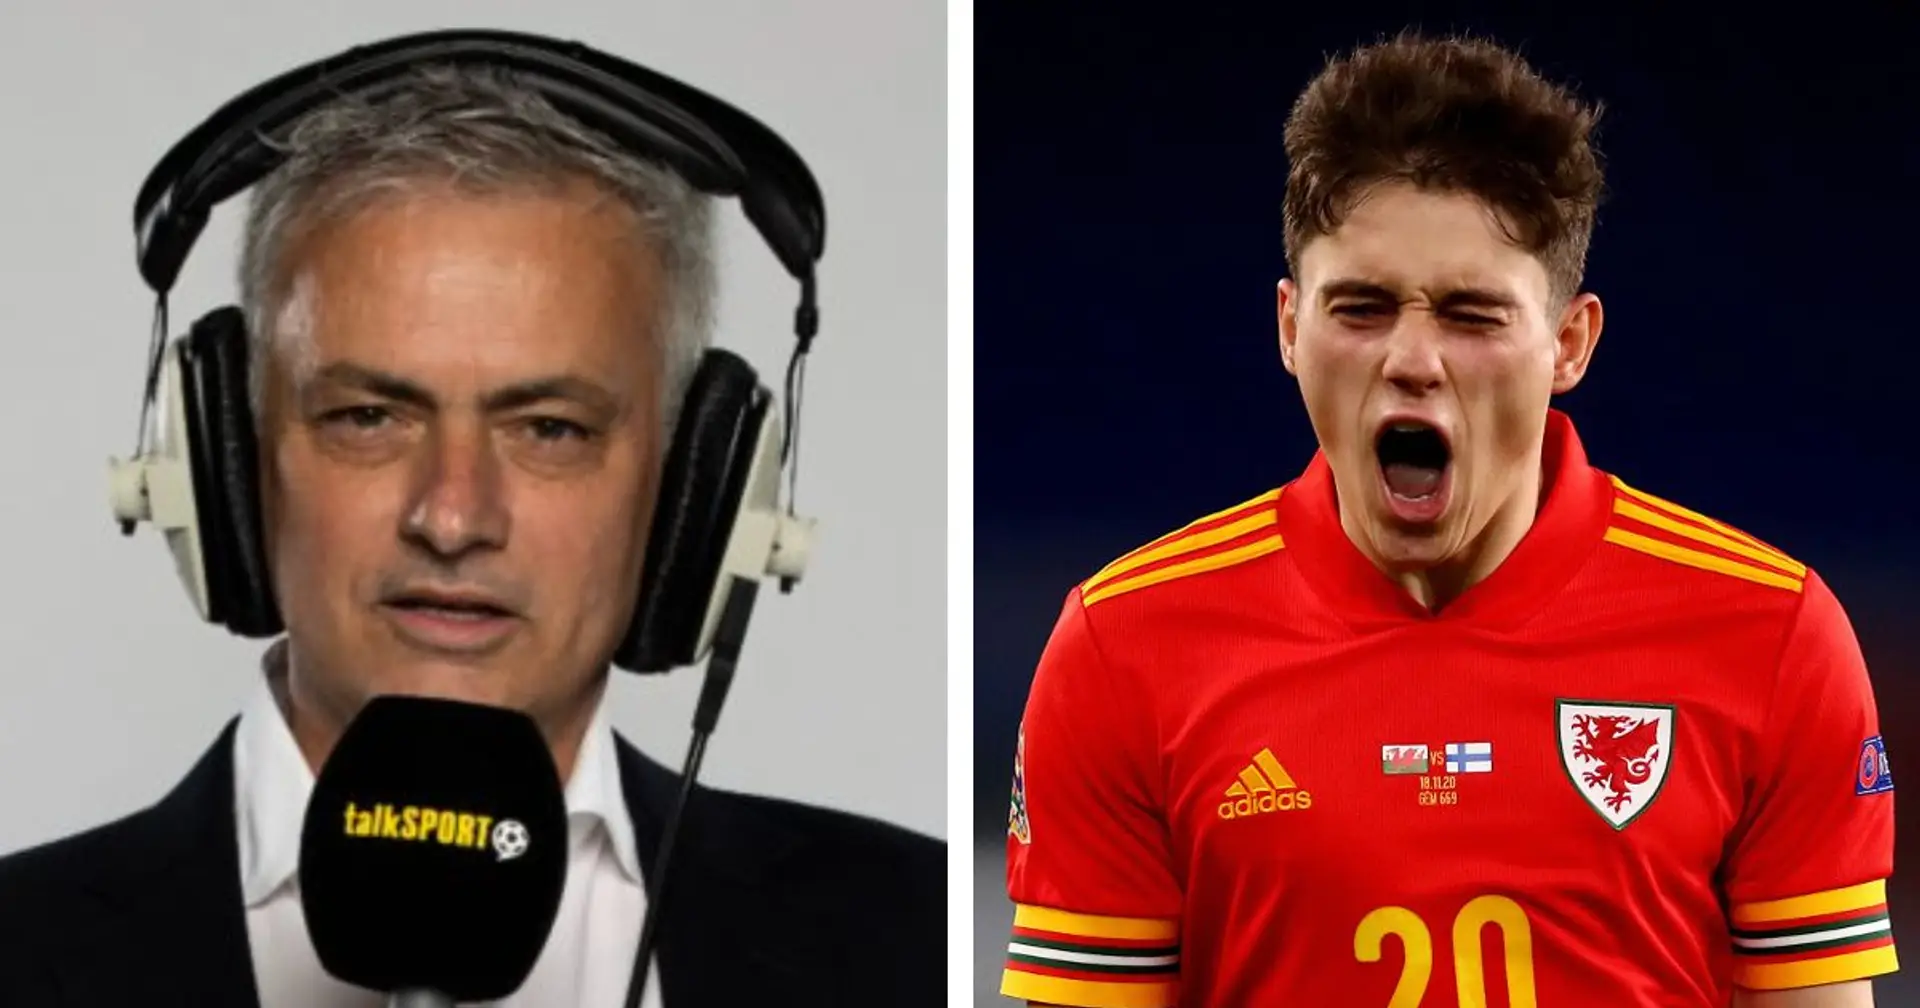 'Wales rely on him a lot': Jose Mourinho continues to heap praise on Dan James